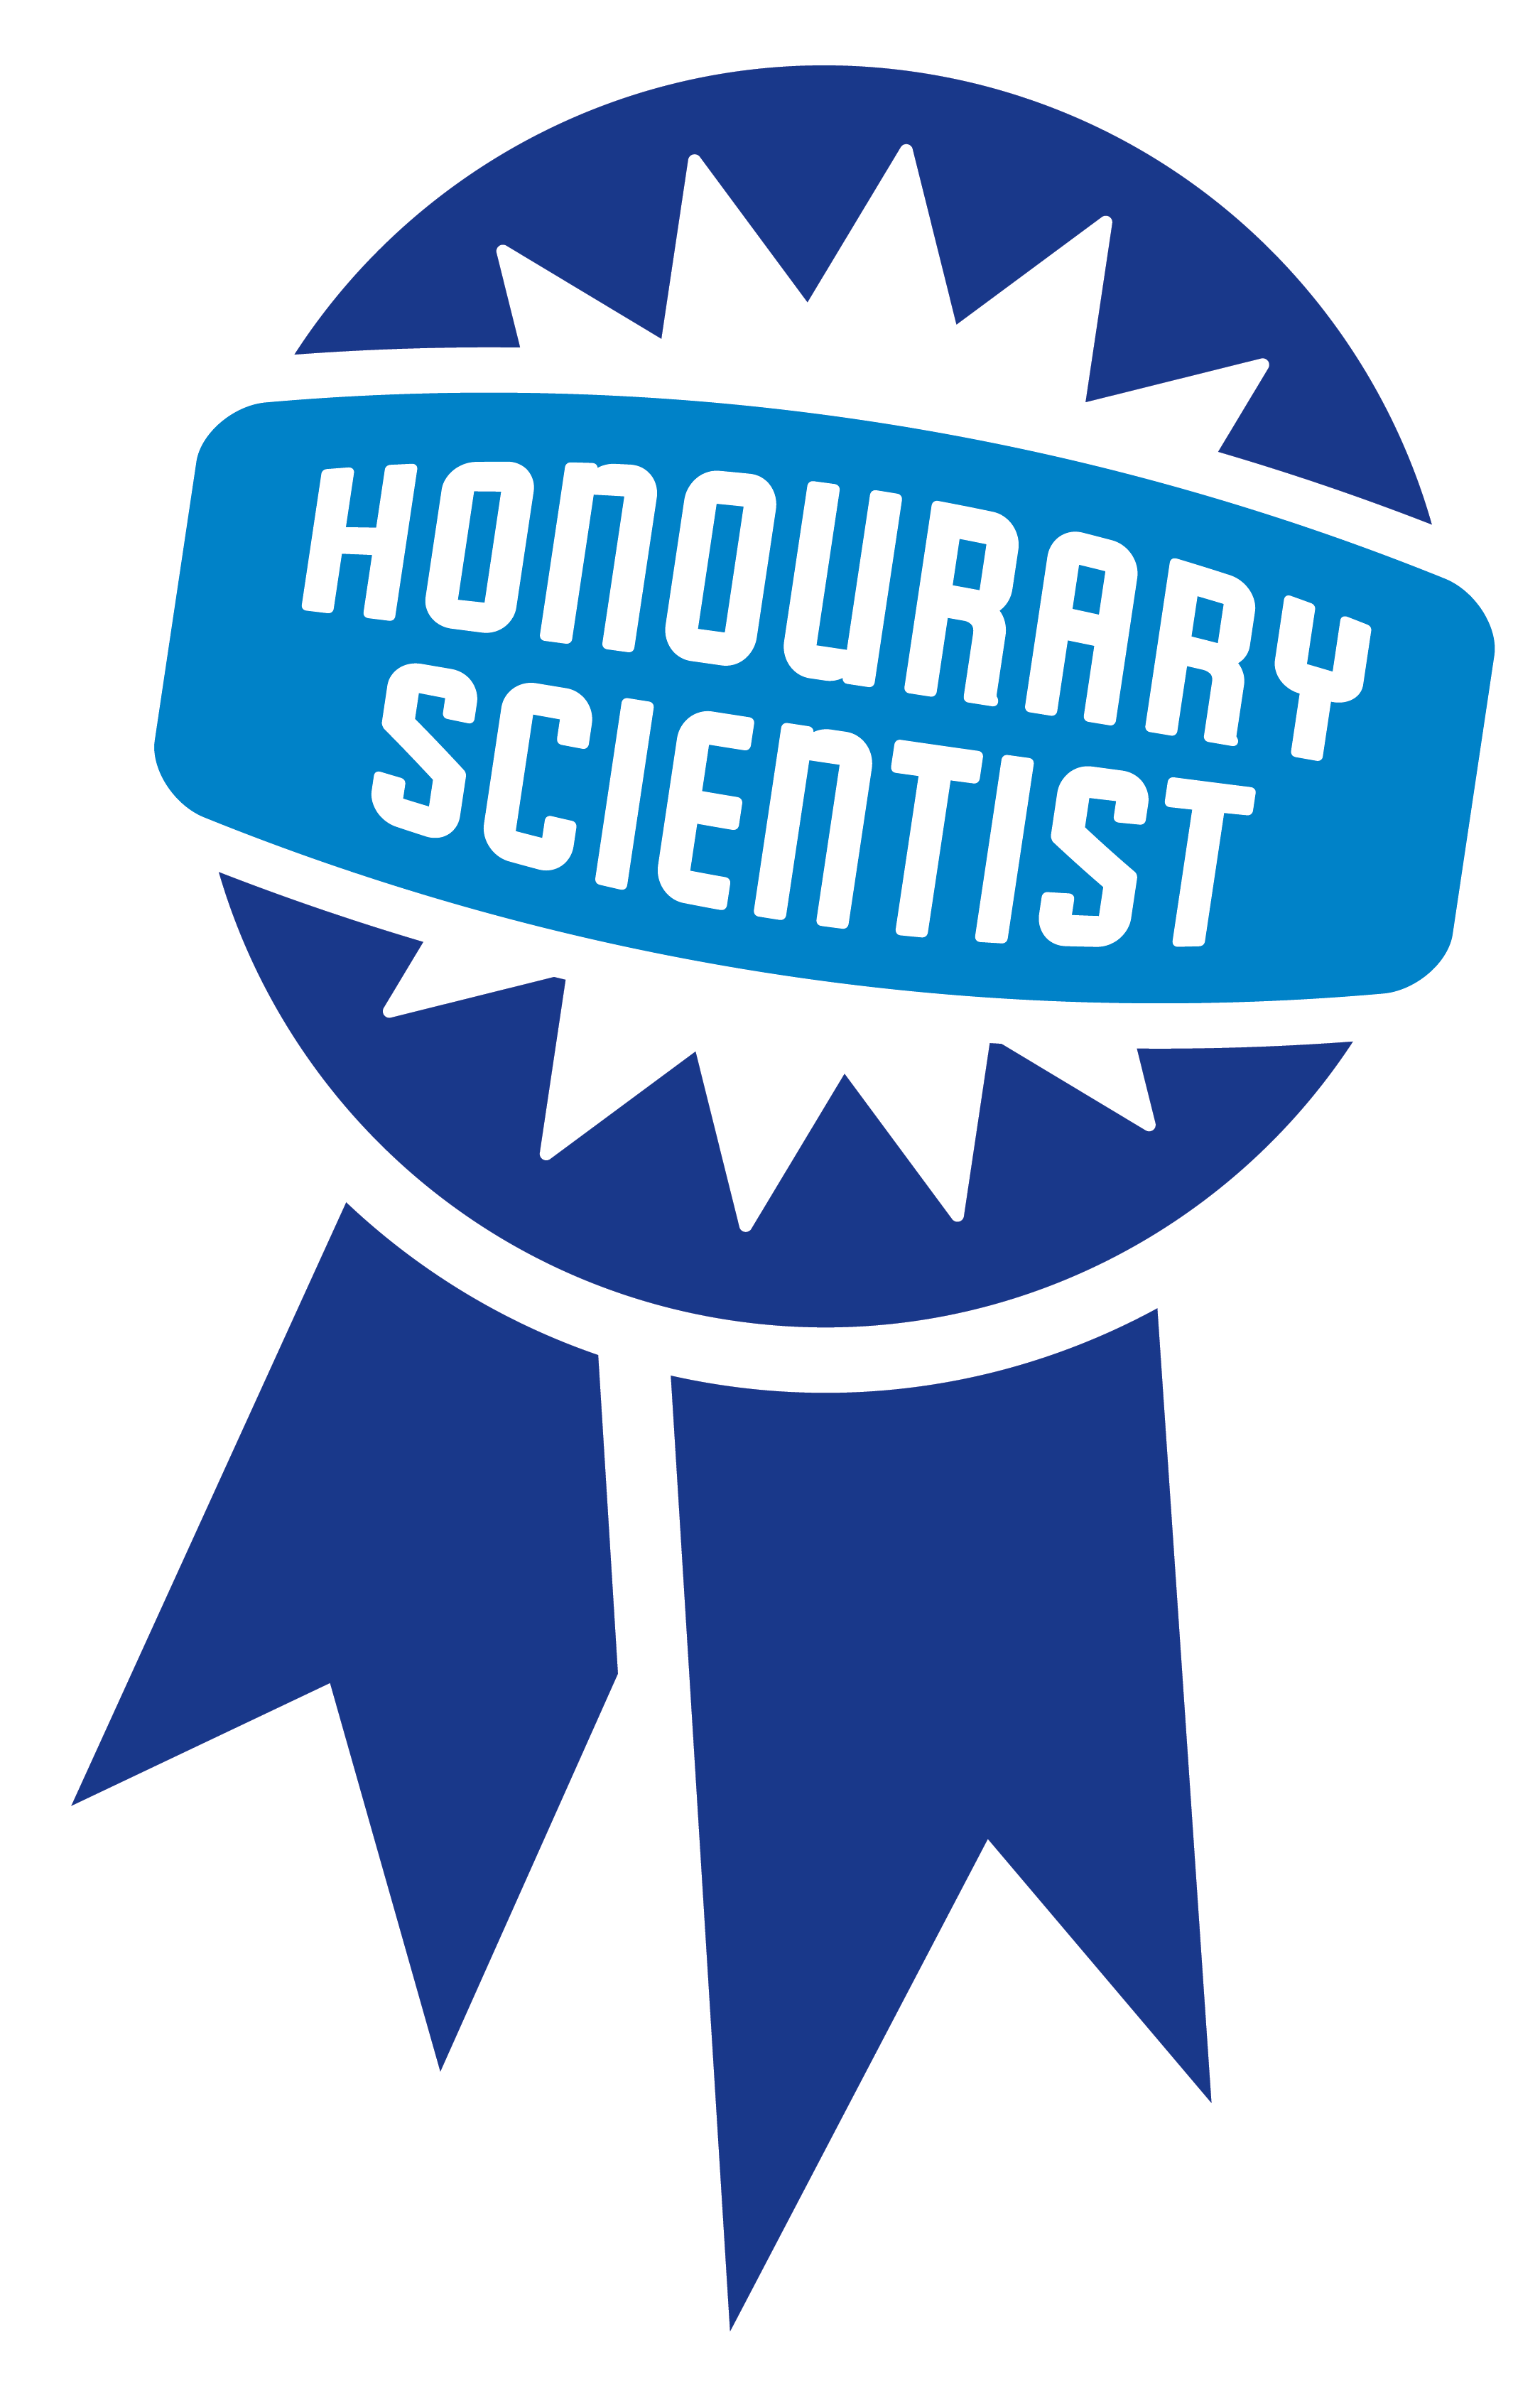 blue ribbon that says honourary scientist